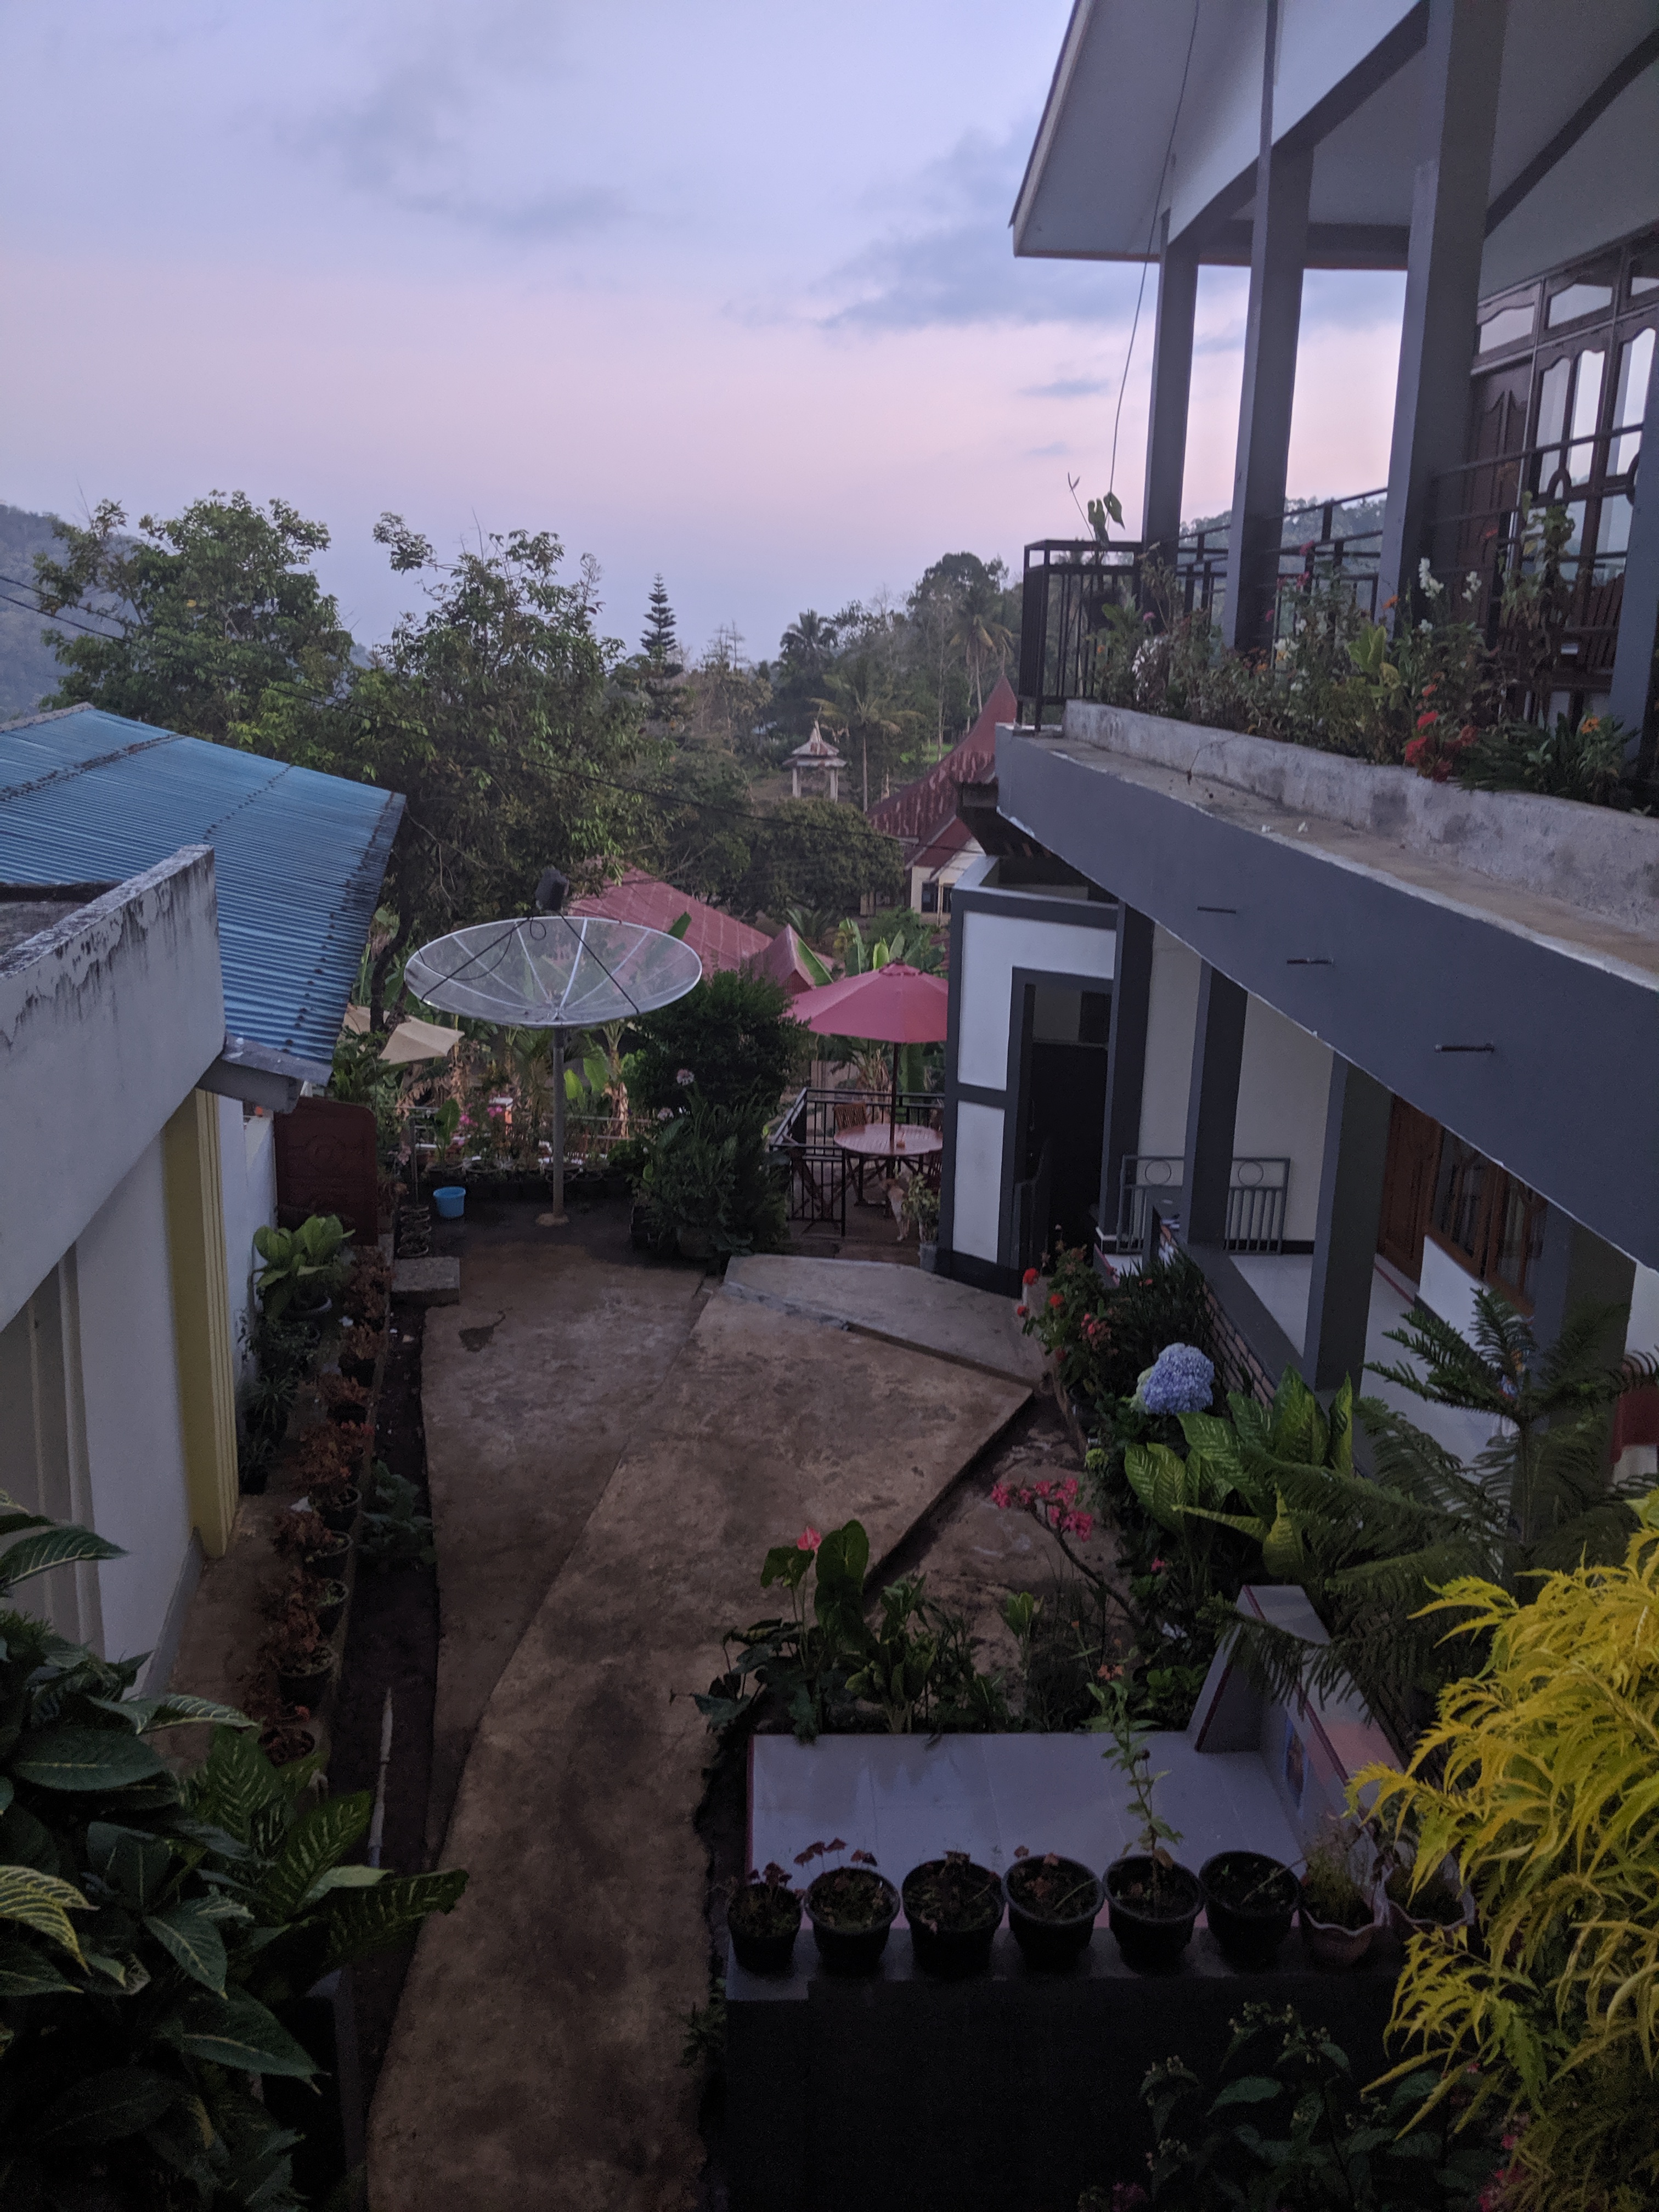 Looking through the middle of a homestay with rooms on the right and two family graves below.